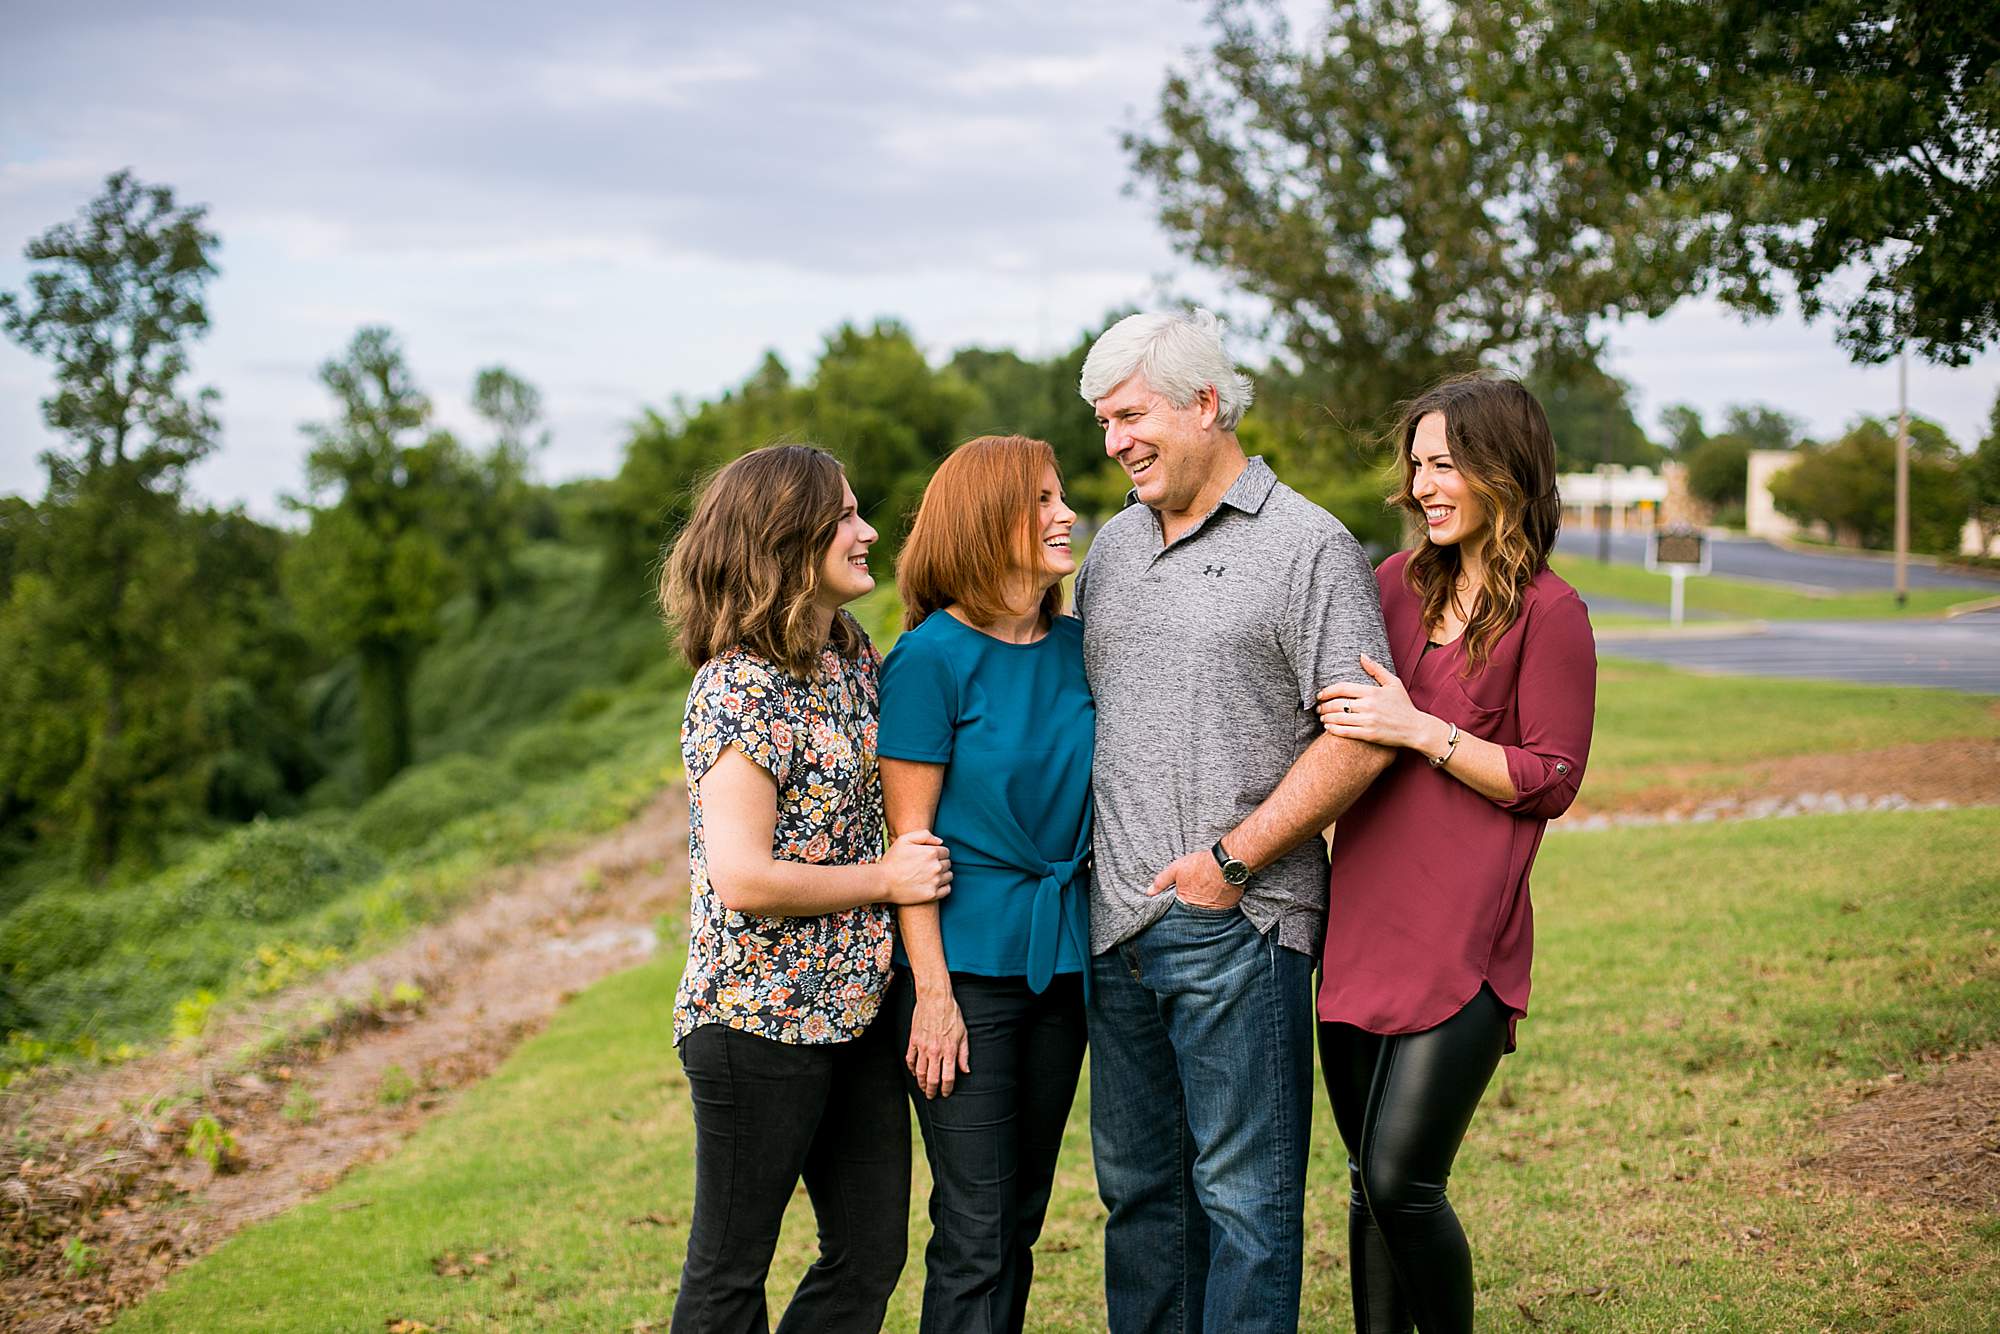 Thinking of locations for your family session can be daunting! It can be pressure choosing somewhere meaningful, beautiful and a reflection of your family.